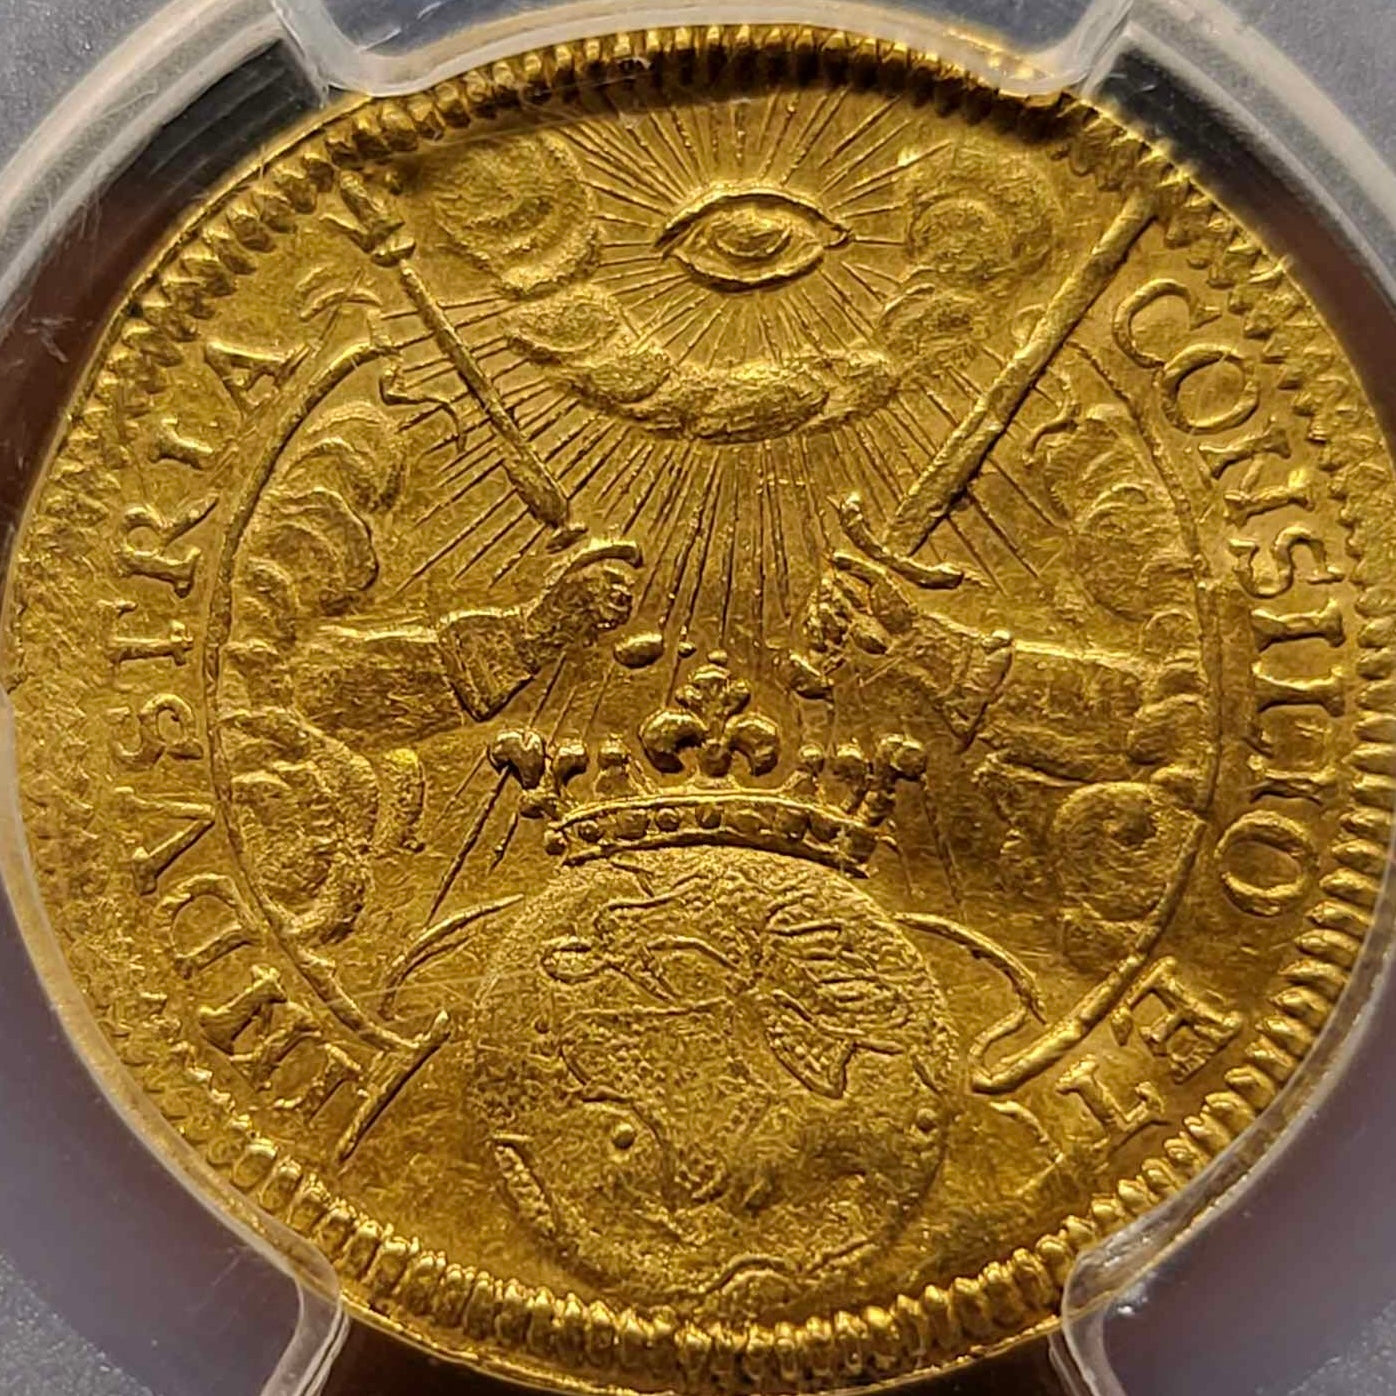 [World's highest appraisal, the only one of its kind] Holy Roman Empire Frankfurt issued Ducat gold coin 1658 MS-62 